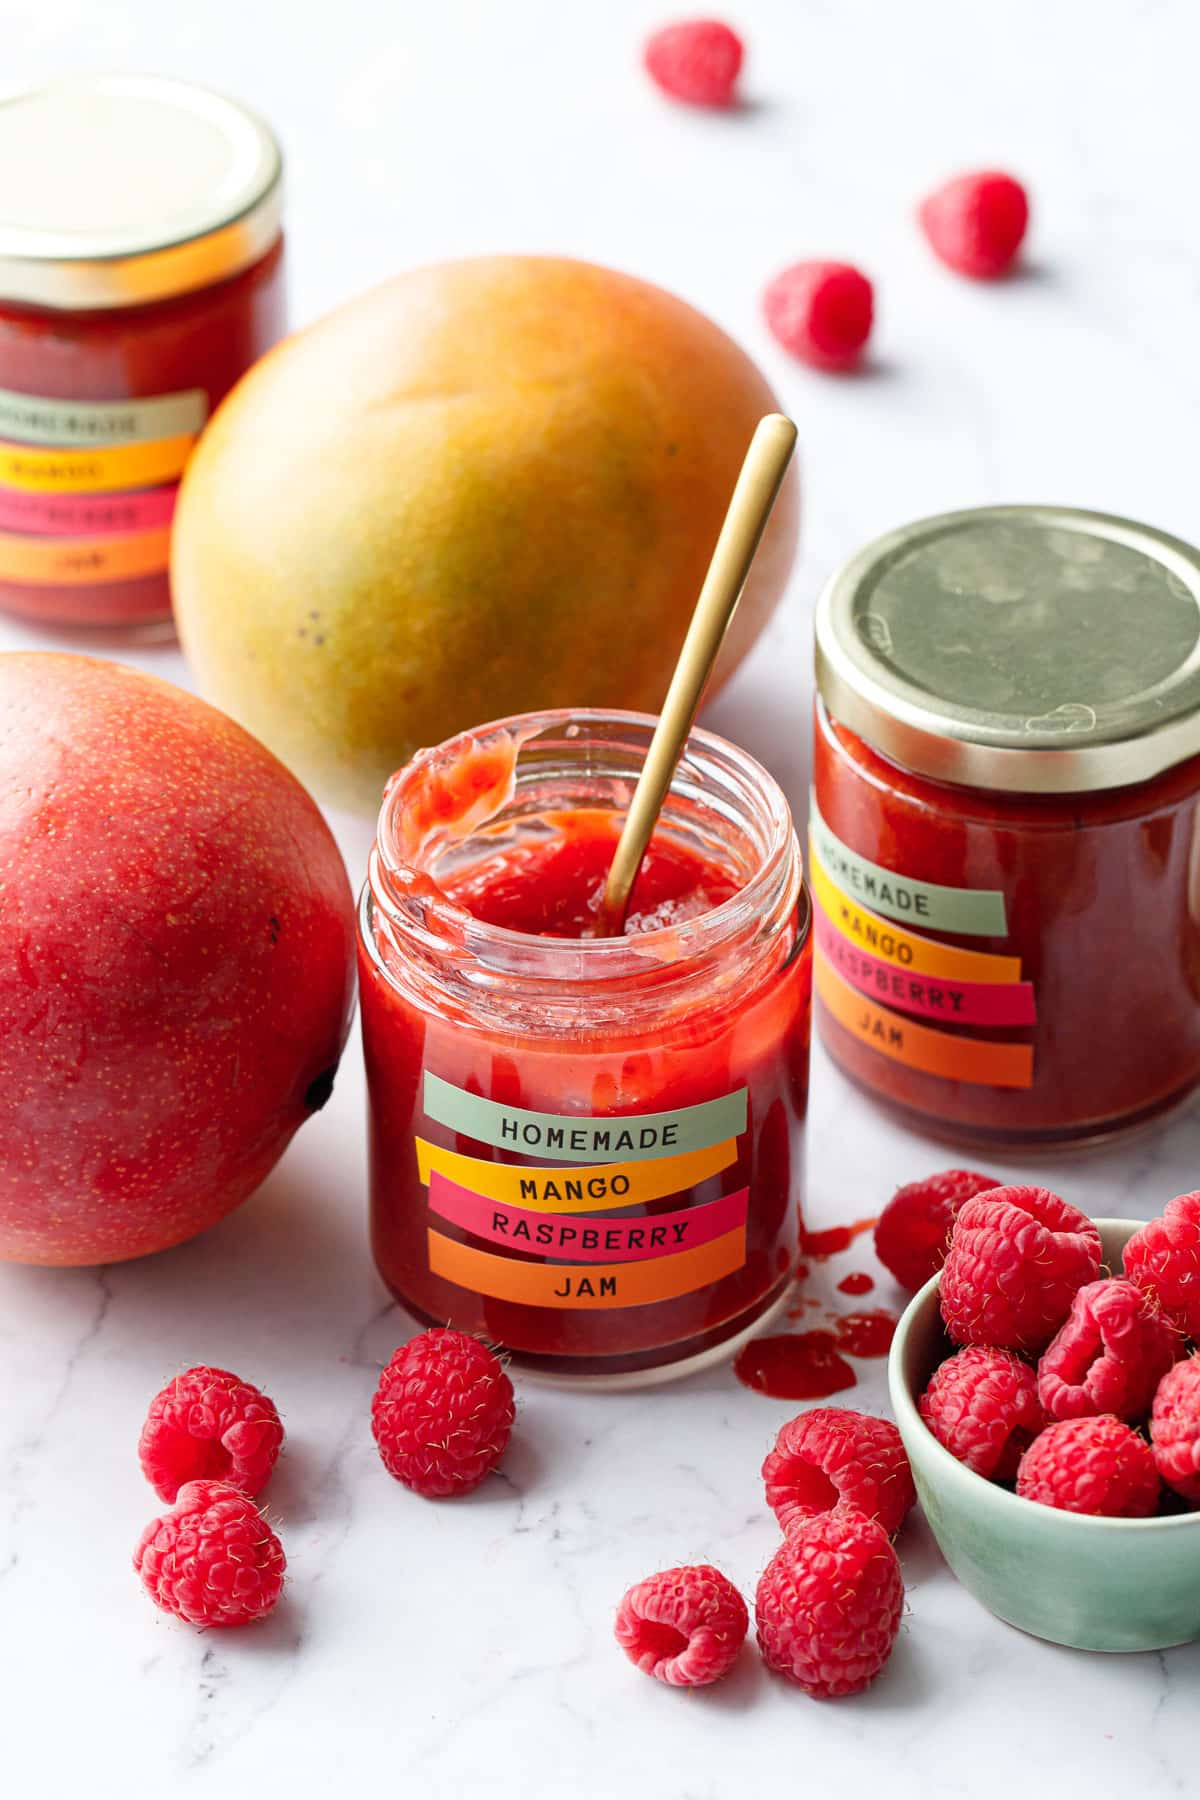 Jars of Mango Raspberry Jam, one open to show the texture of the jam, with scattered mango fruits and raspberries around.